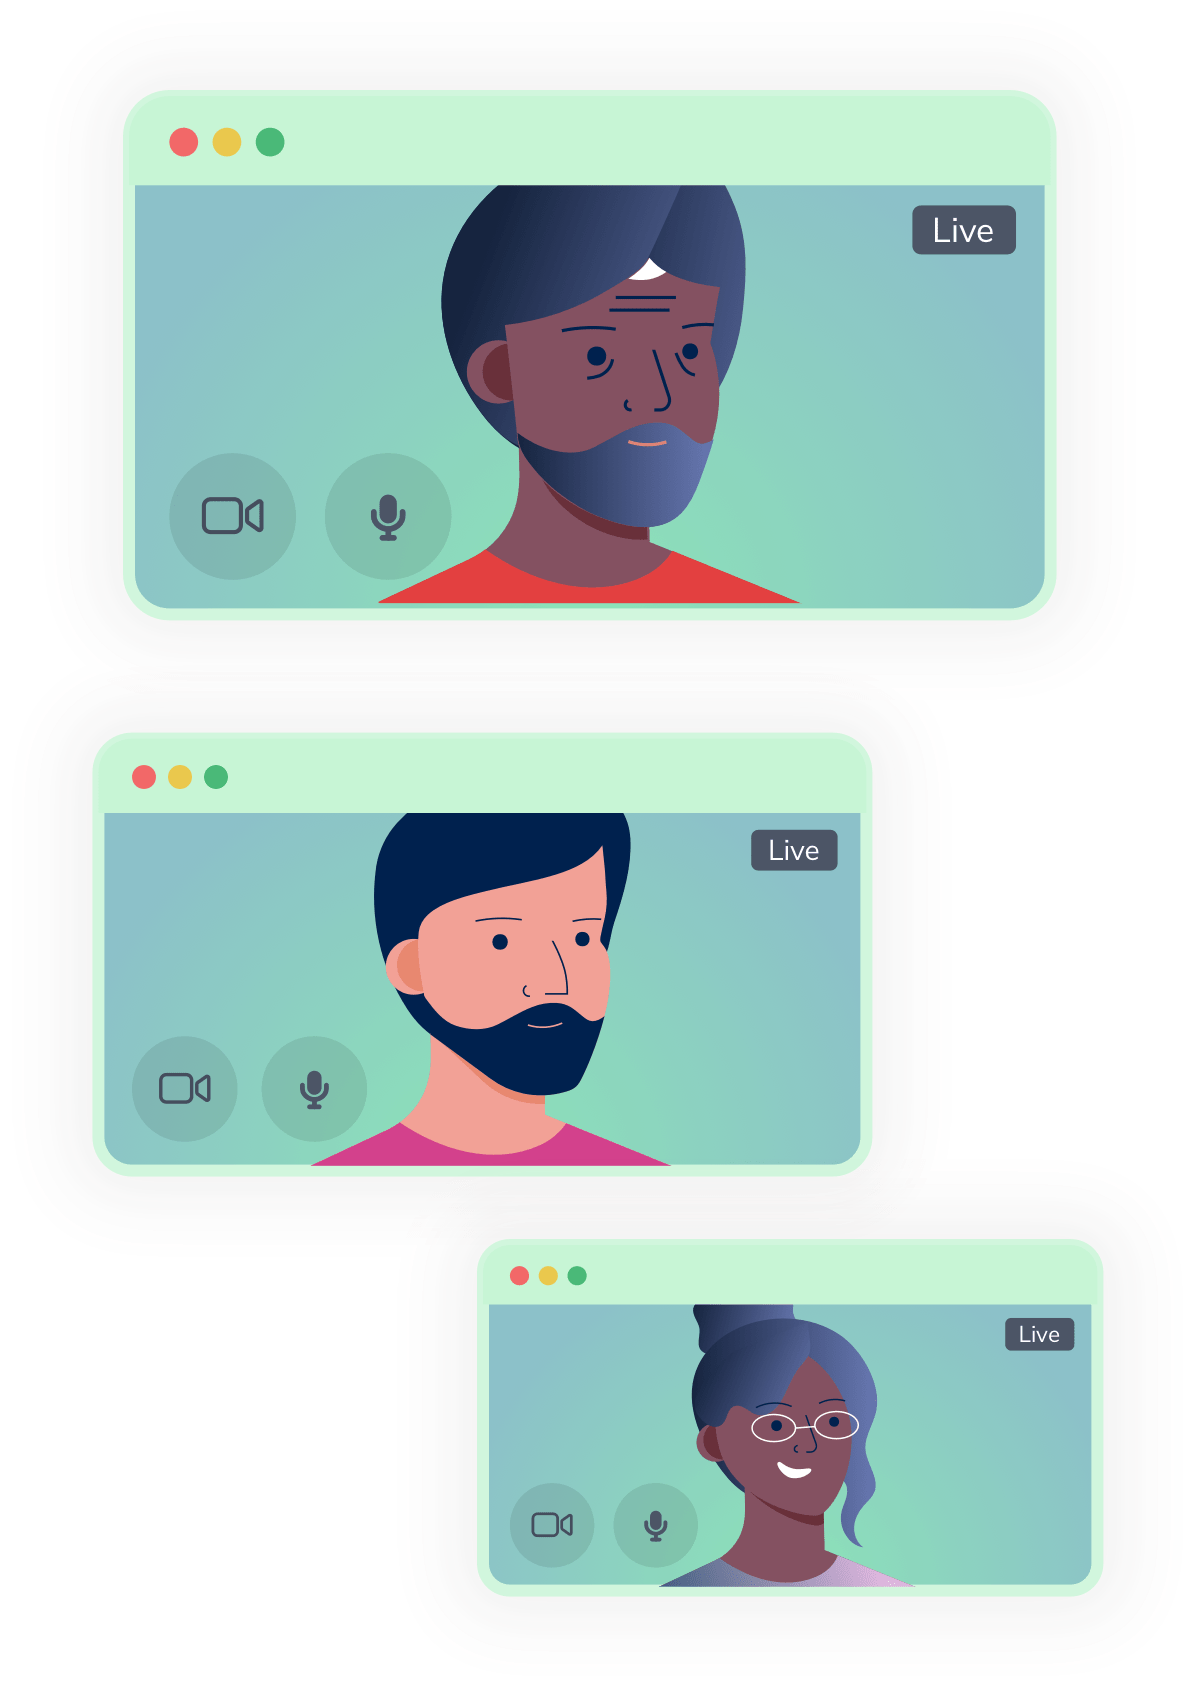 3 people having a video chat in browser windows